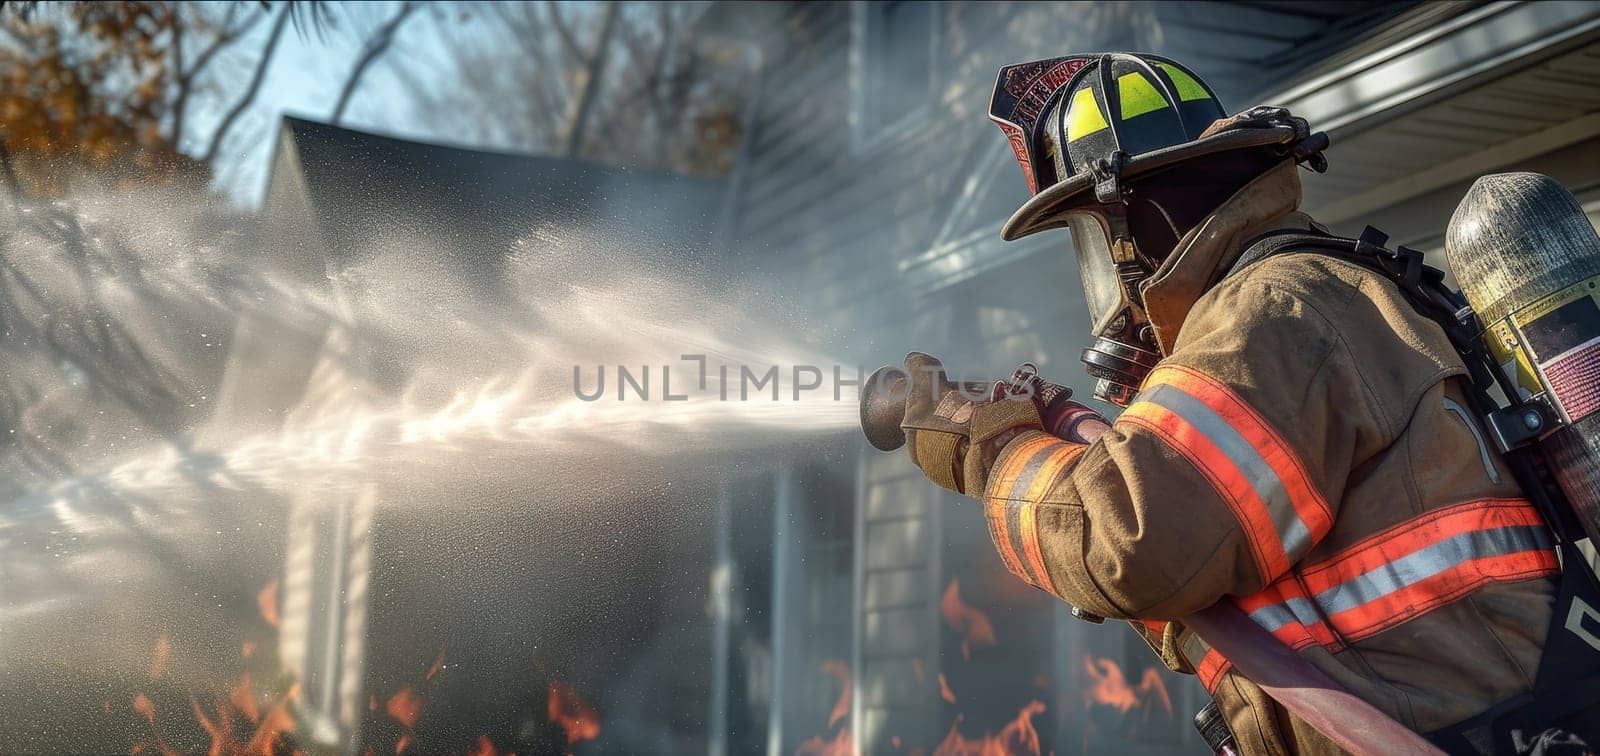 Firefighter in action, spraying water to extinguish flames engulfing a residential house, showcasing bravery and emergency response